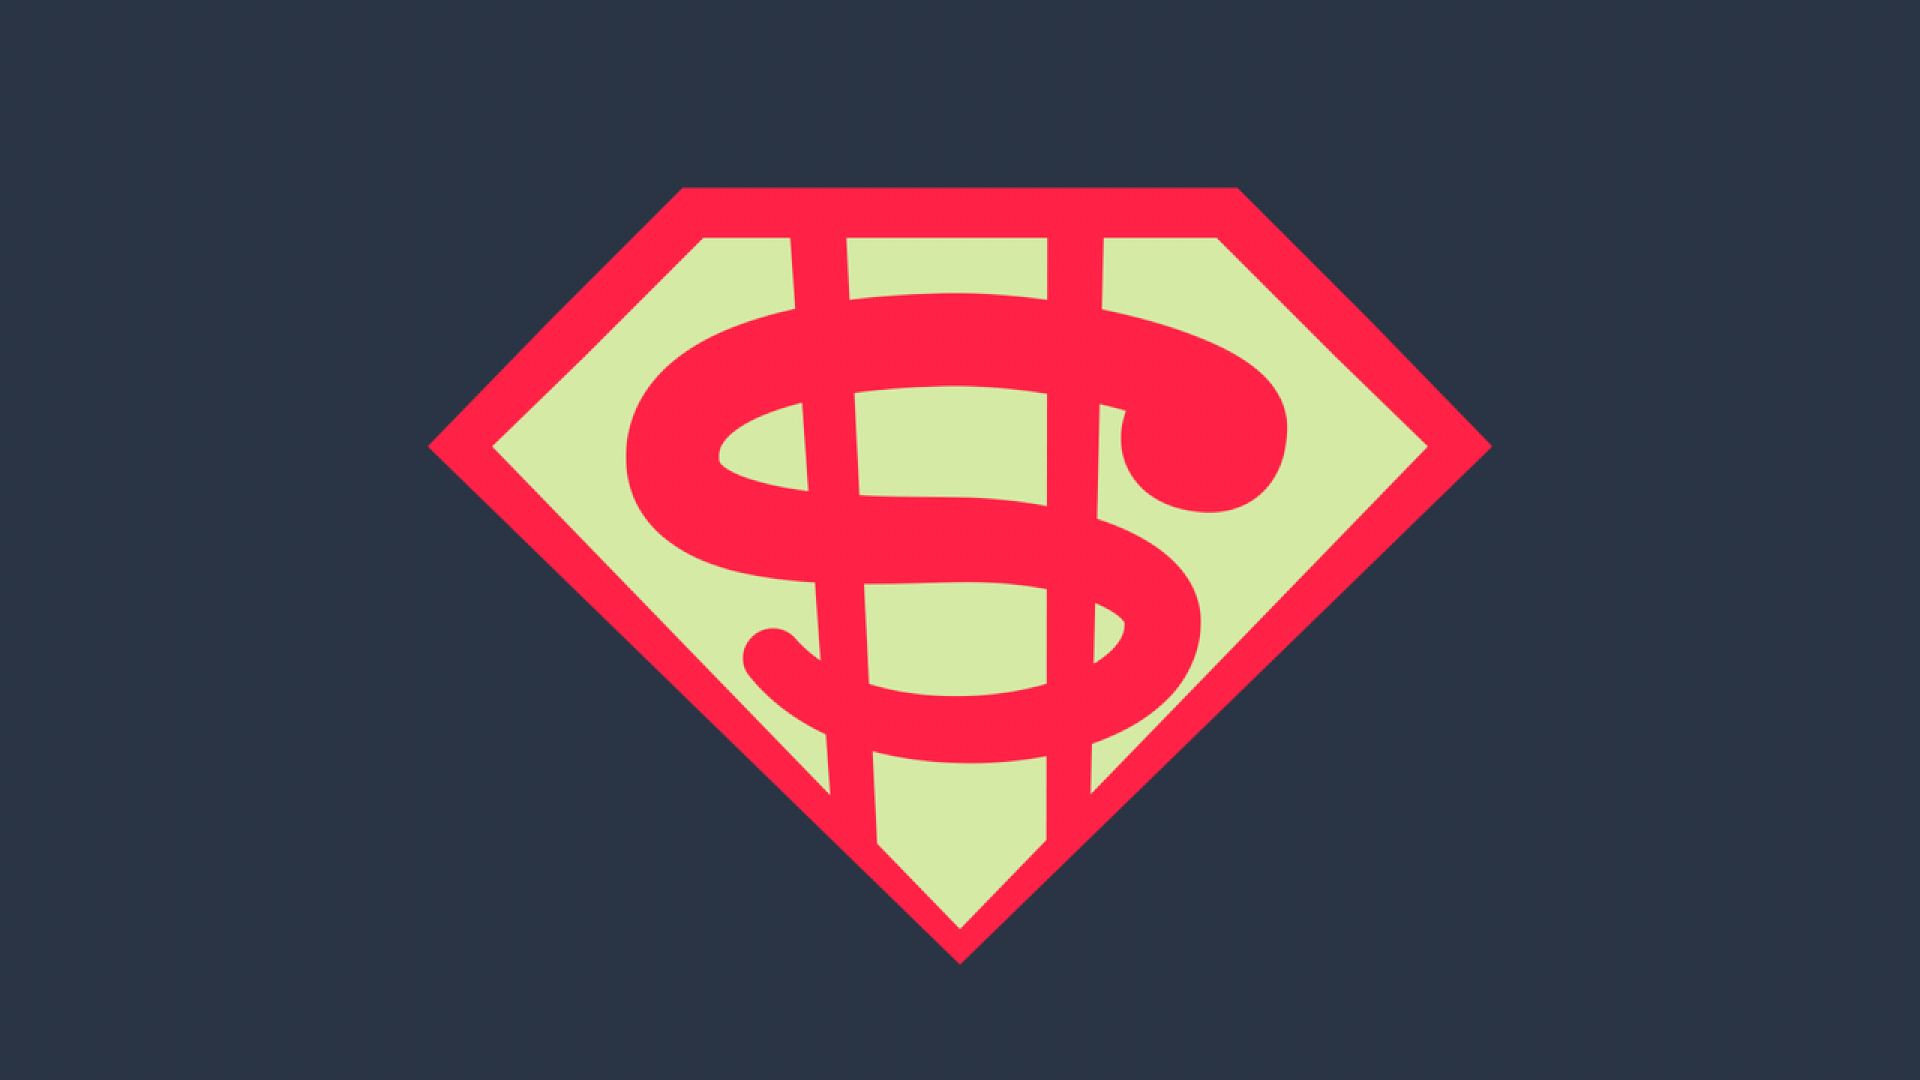 Illustration of a superhero symbol with a dollar sign that changes to a question mark.